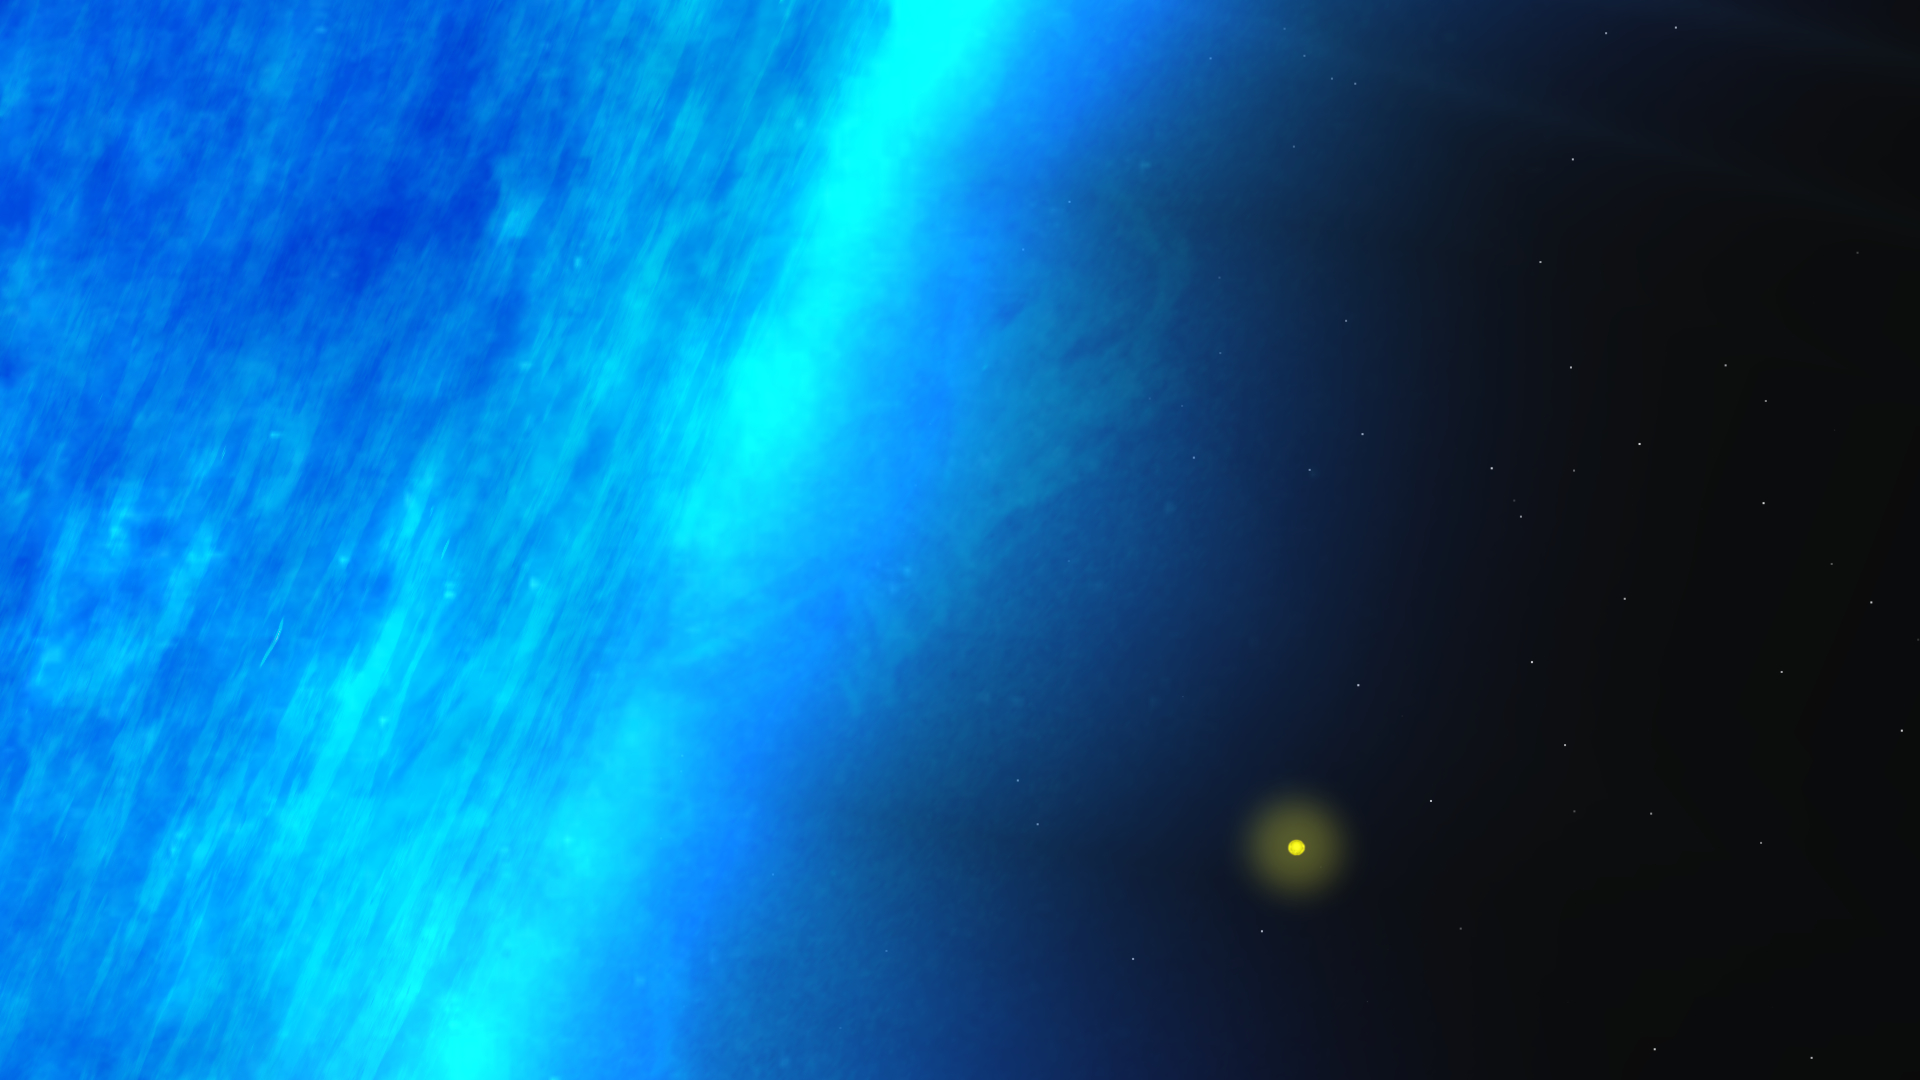 Blue supergiant star to scale with the Sun. Unlabeled.Credit: NASA's Goddard Space Flight Center/S. Wiessinger